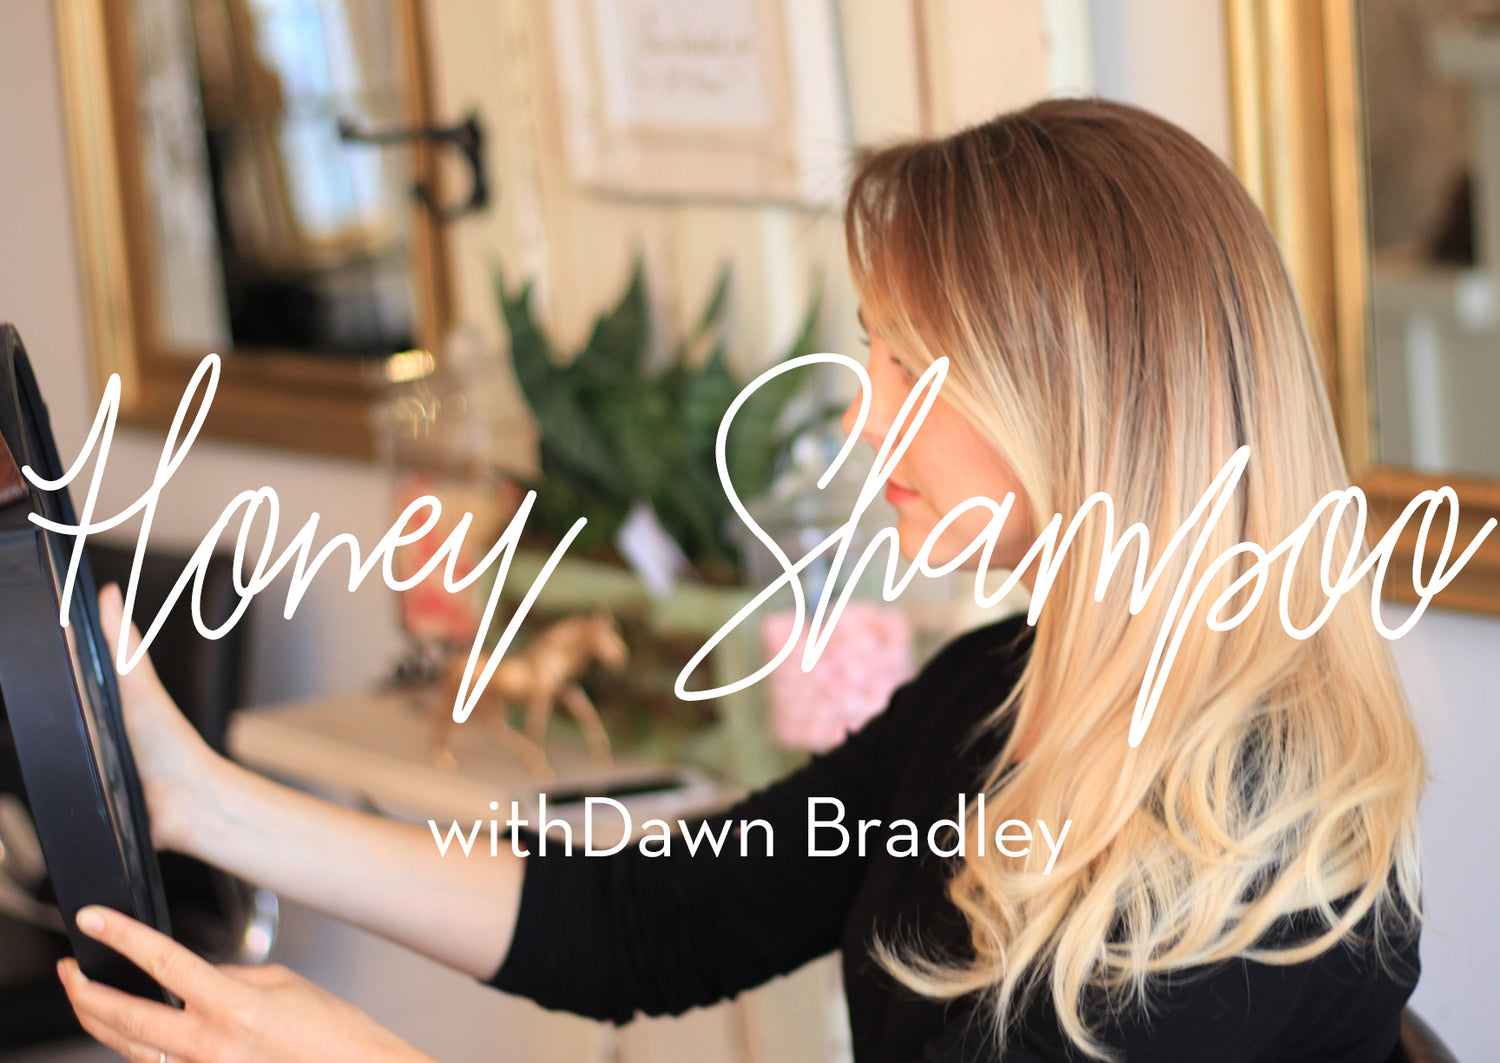 Honey Shampoo Video with Dawn Bradley and Drizzle Honey